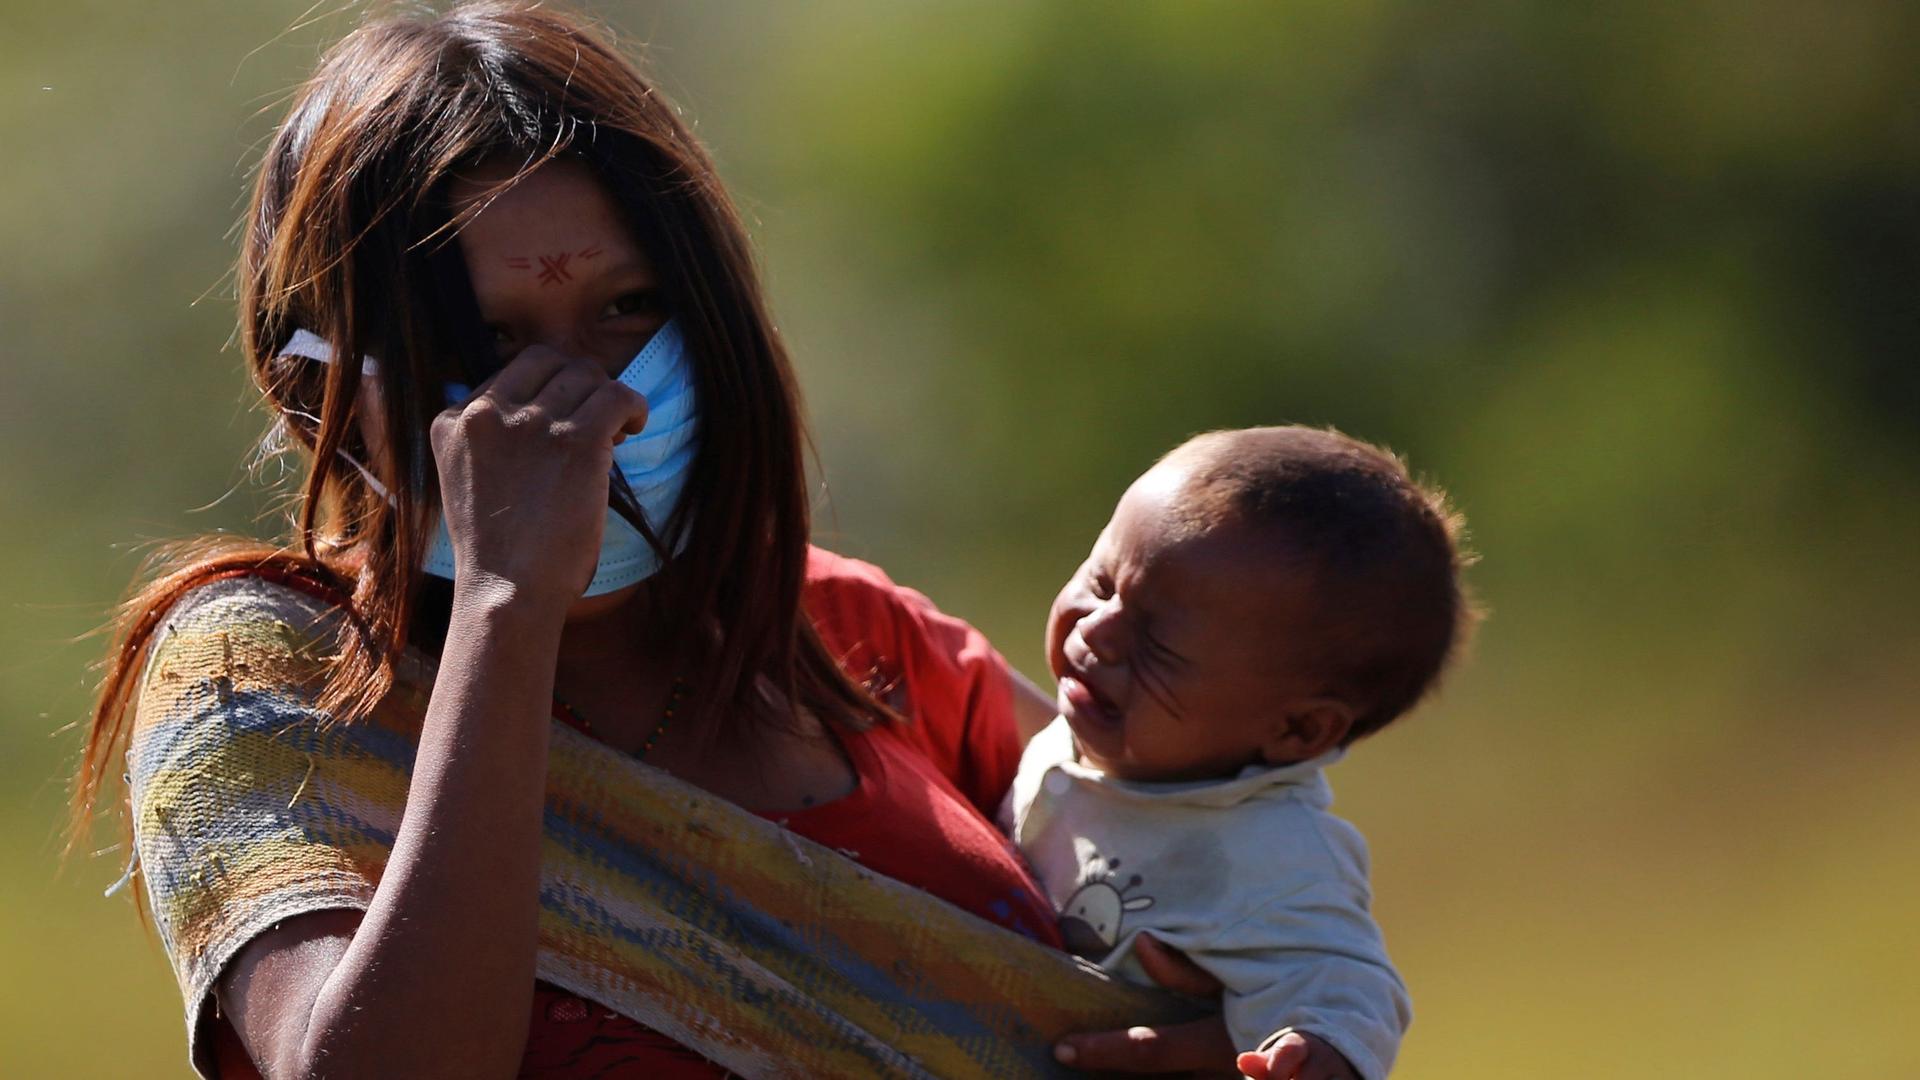 A woman from the Yanomami Indigenous ethnic group wearing protective mask while carrying a child looks on, amid the spread of the coronavirus disease (COVID-19), at the 5th Special Frontier Platoon in the municipality of Auaris, state of Roraima, Brazil, 